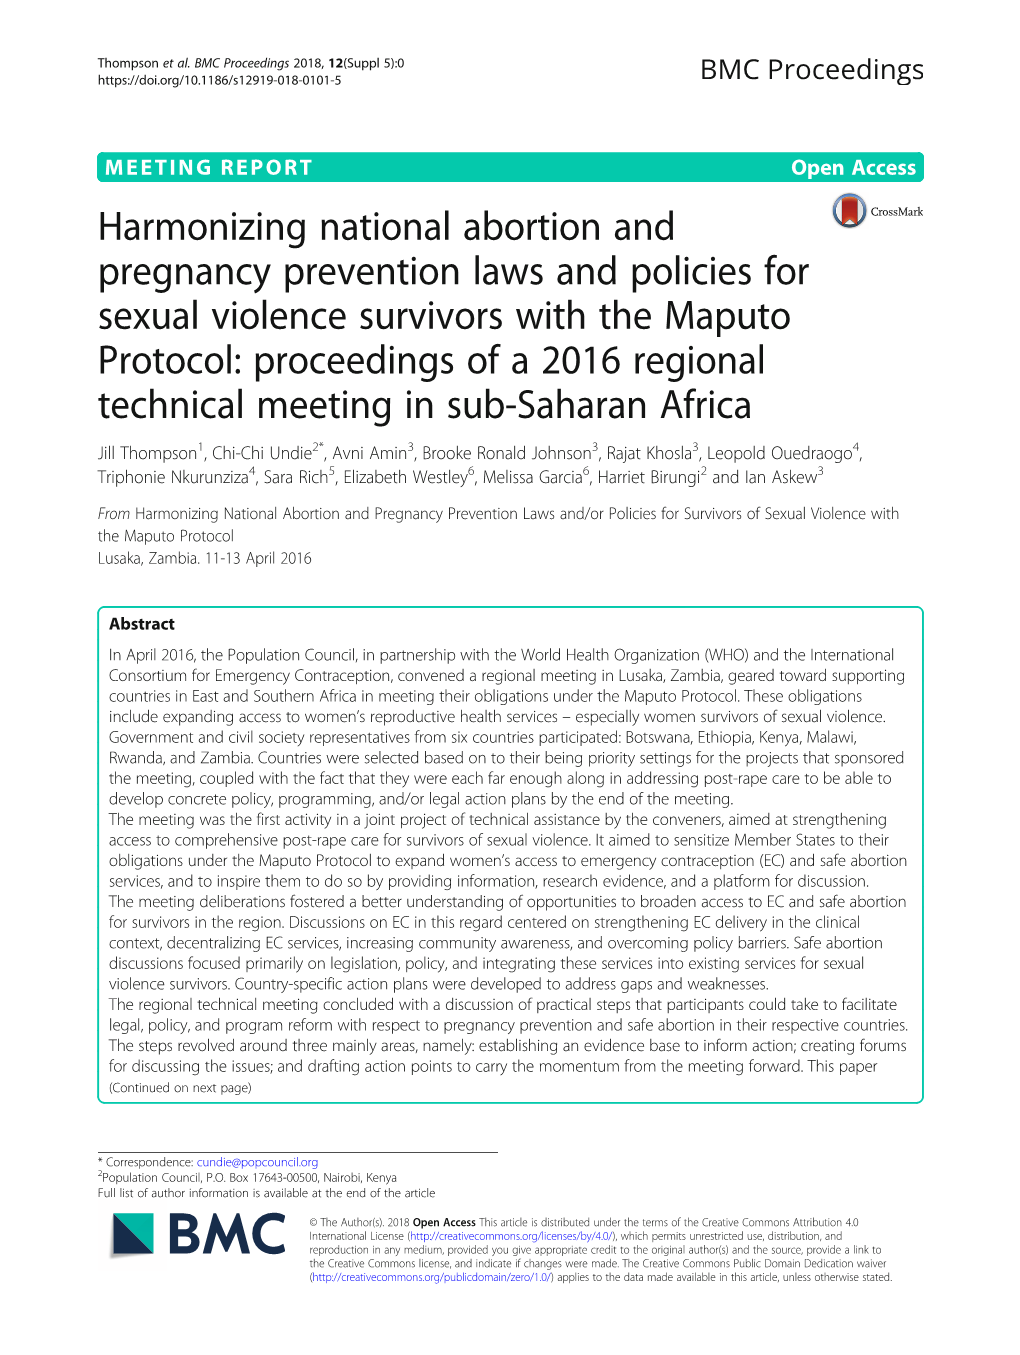 Harmonizing National Abortion and Pregnancy Prevention Laws And